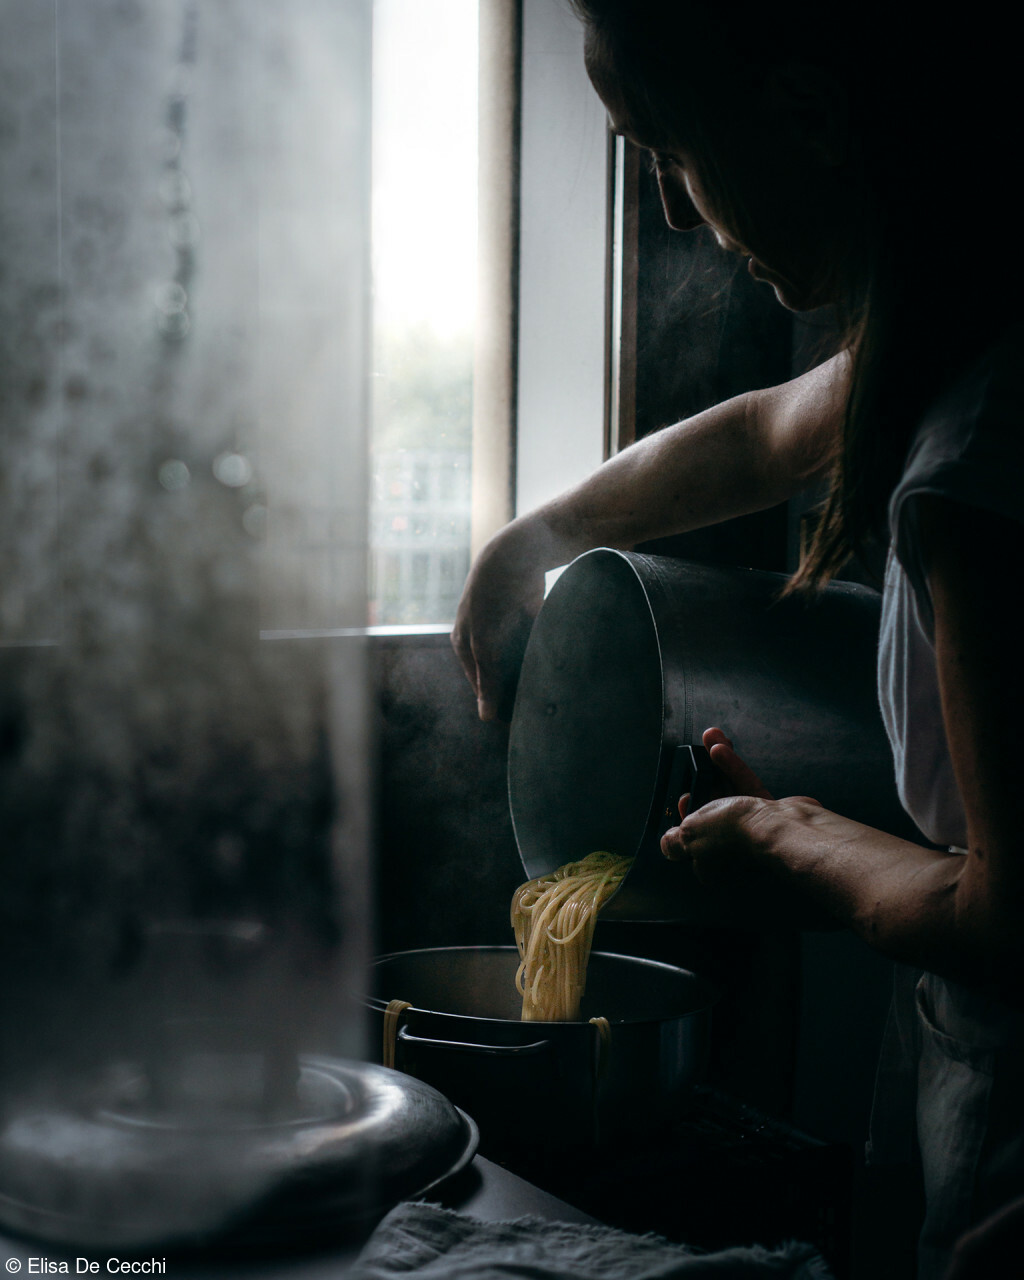 Draining pasta by the window. © Elisa De Cecchi/Pink Lady® Food Photographer of the Year 2022